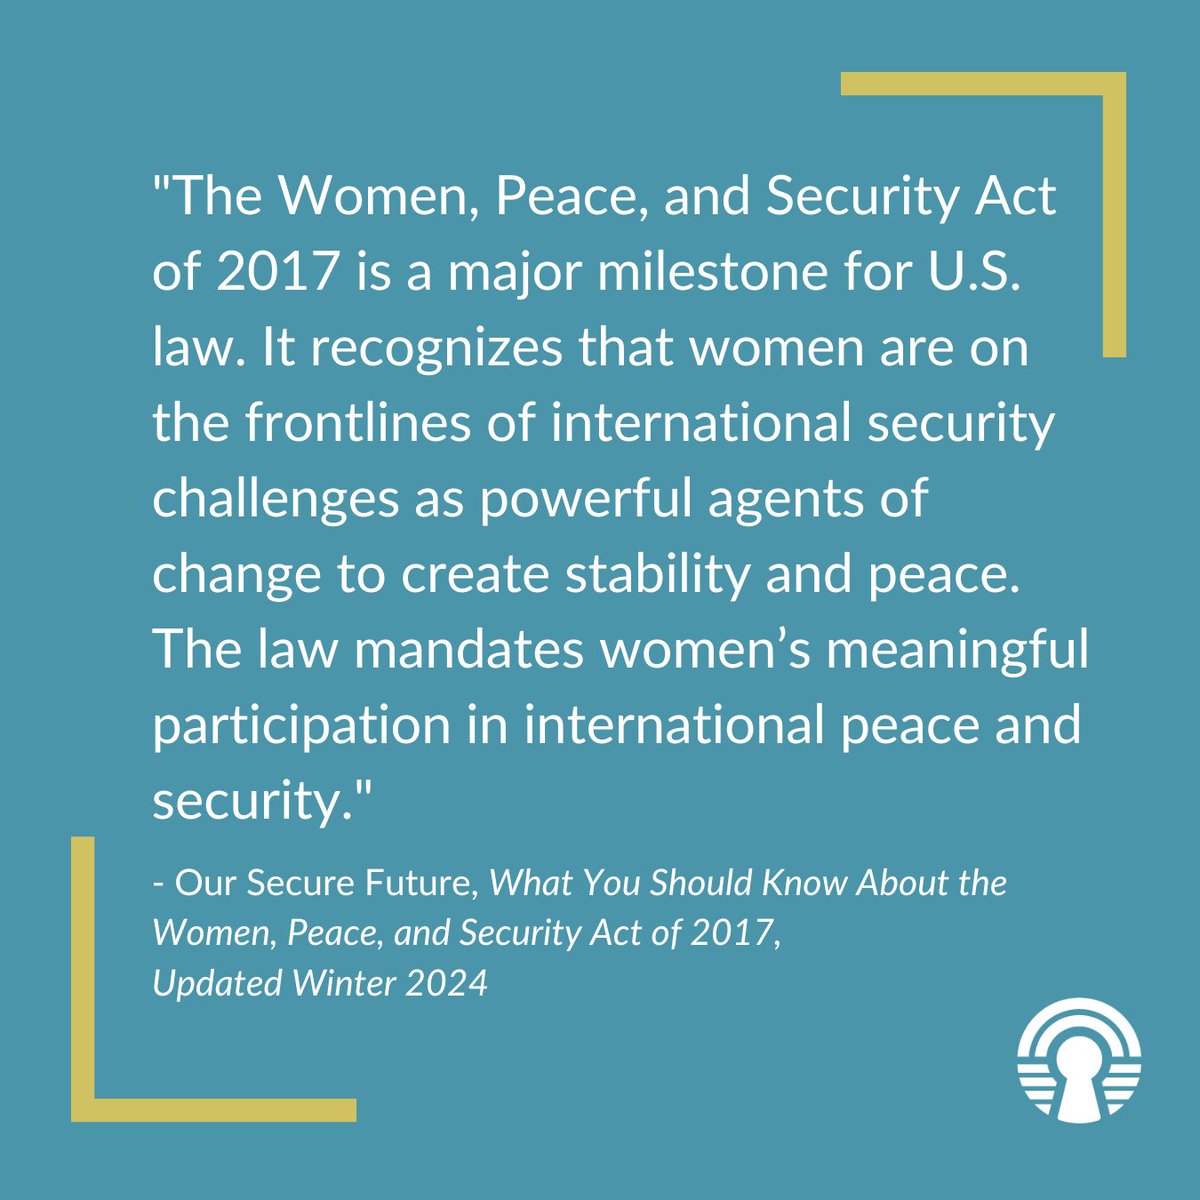 In 2017, the U.S. passed the WPS Act, a piece of landmark legislation that recognizes women as powerful agents of change in peace and security operations. Check out OSF’s recent updated publication on the WPS Act to learn more. ⬇️ oursecurefuture.org/our-secure-fut…